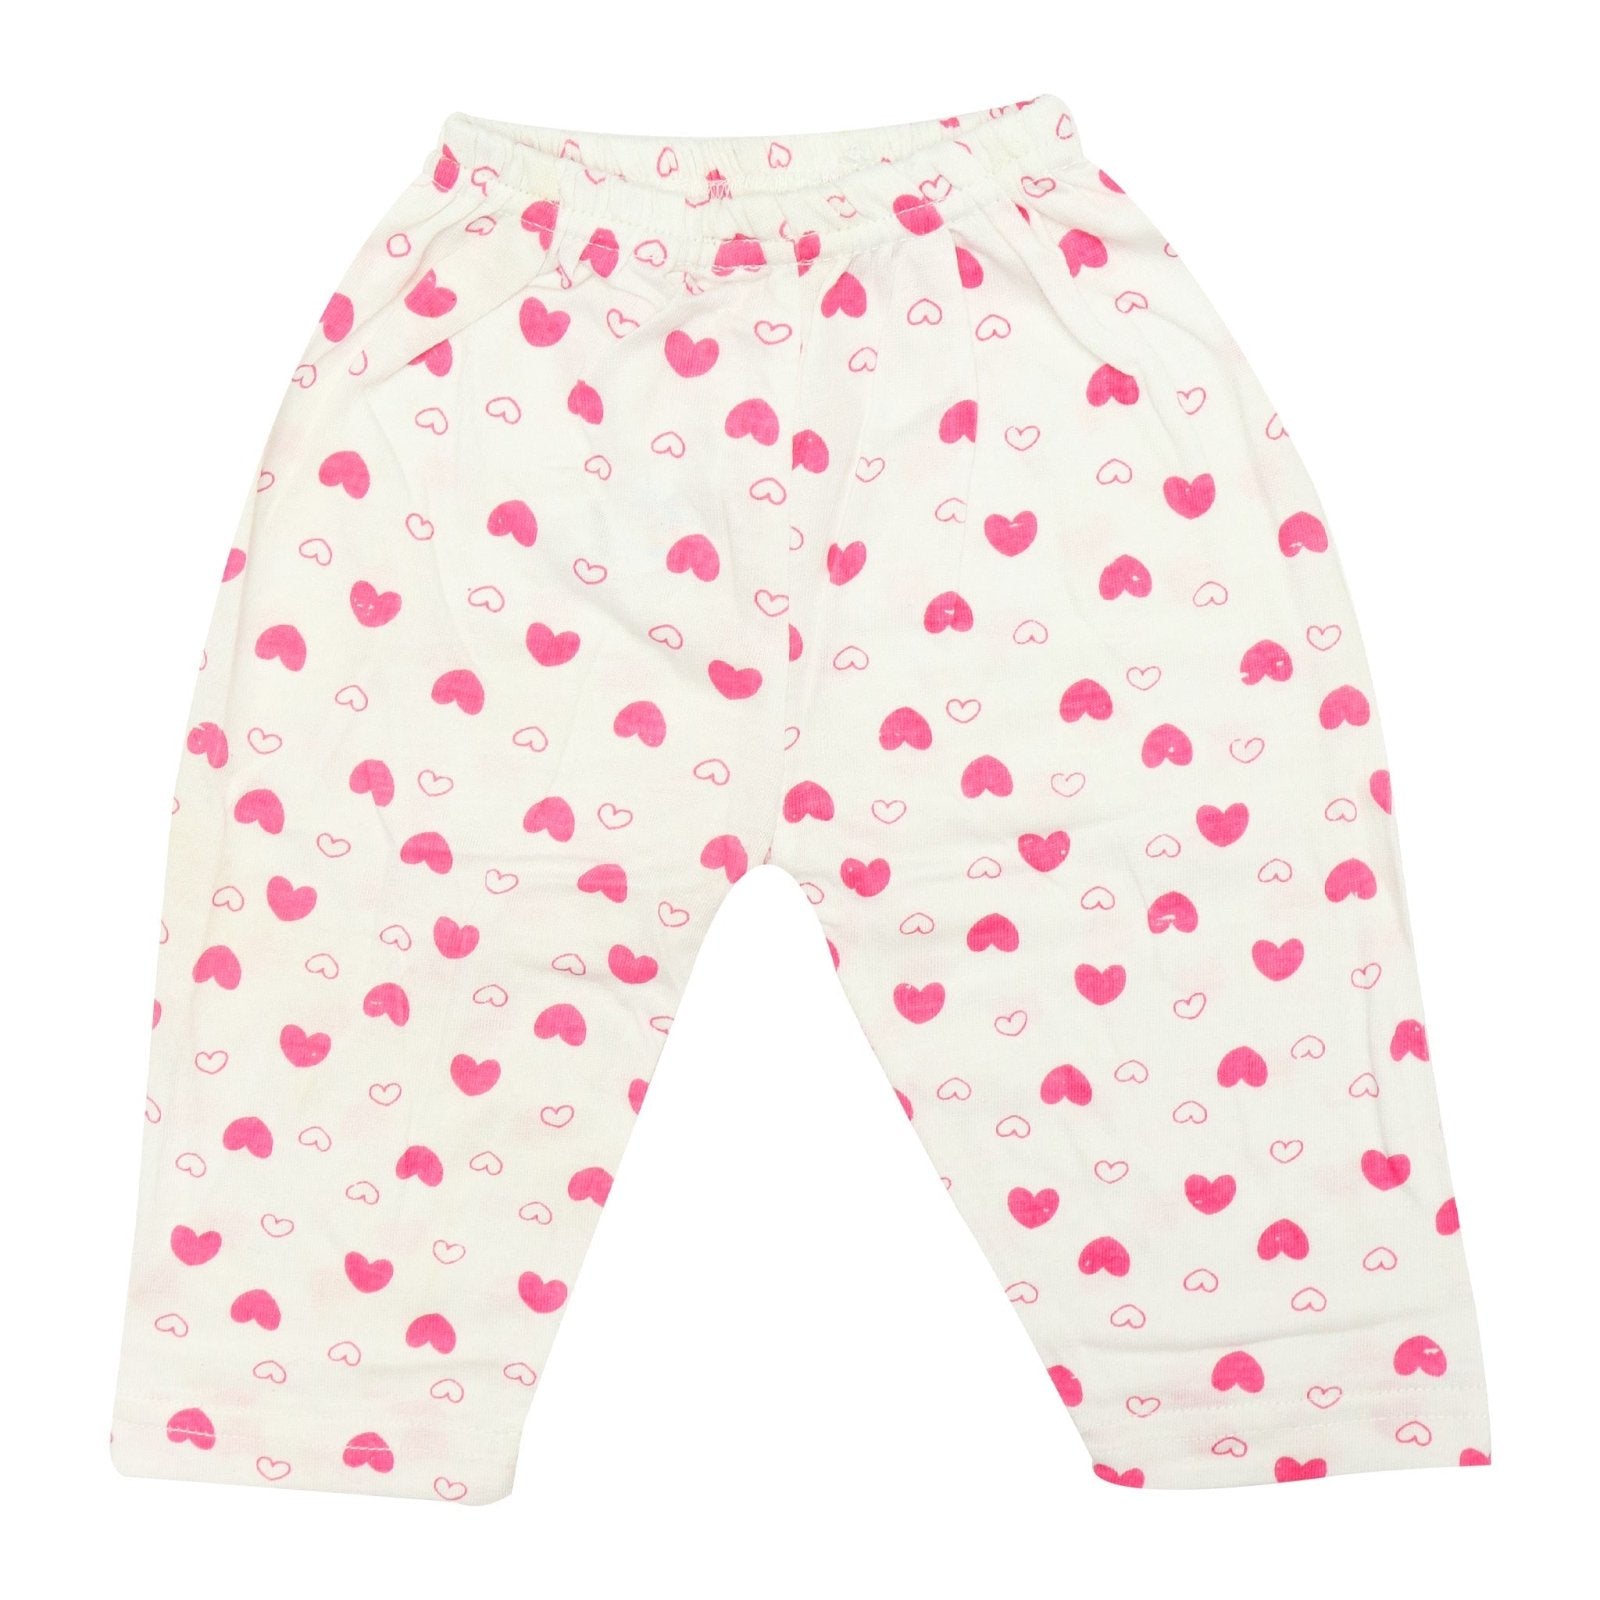 Pajama Set of 2 Mix Color Heart Print by Little Darling